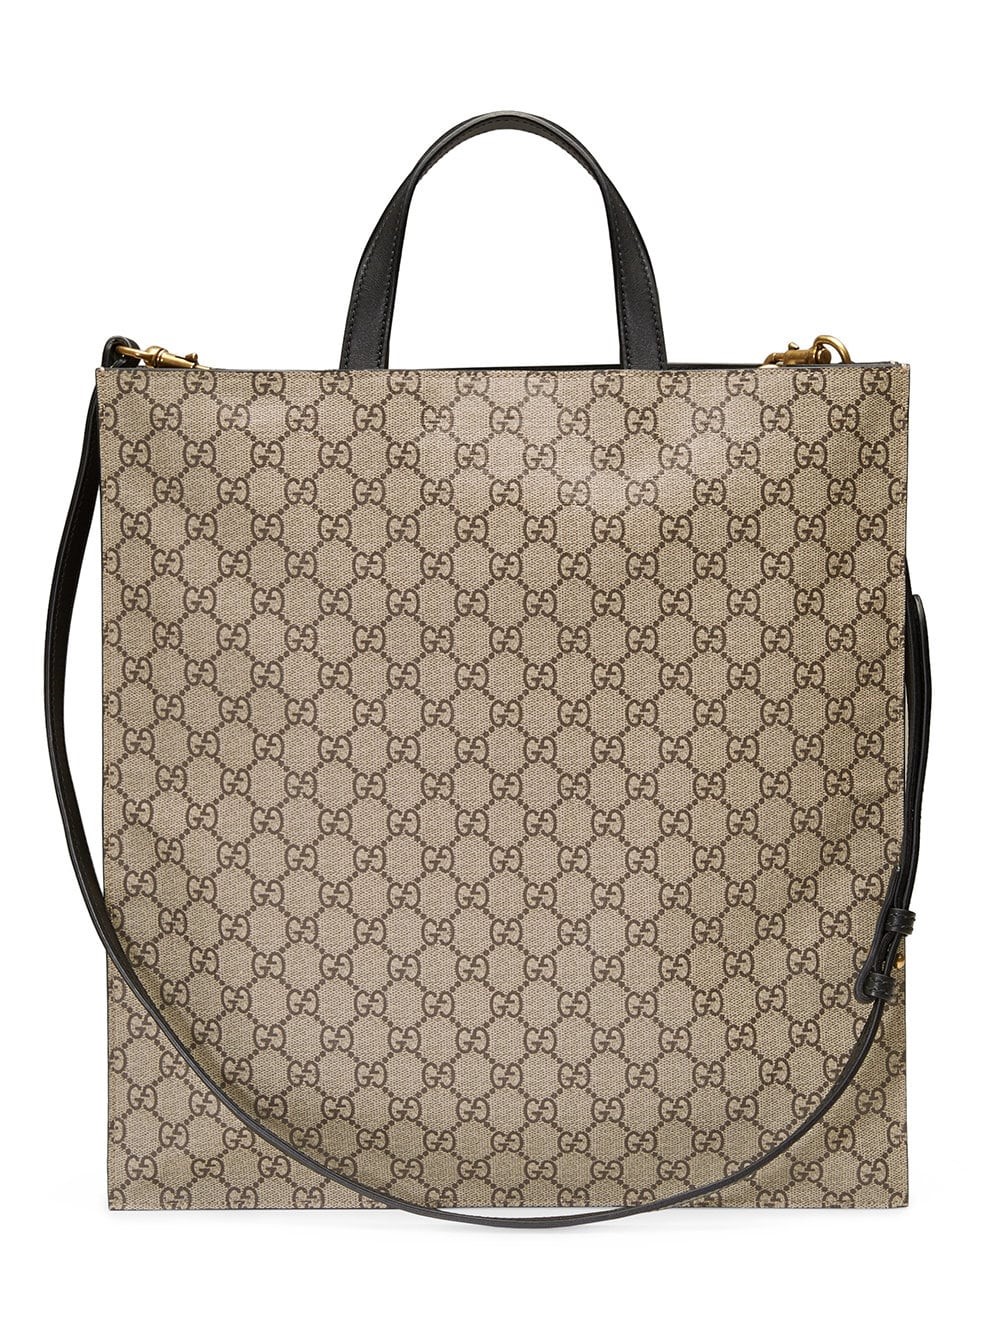 gucci BLIND FOR LOVE BEE TOTE available on www.bagssaleusa.com - 25986